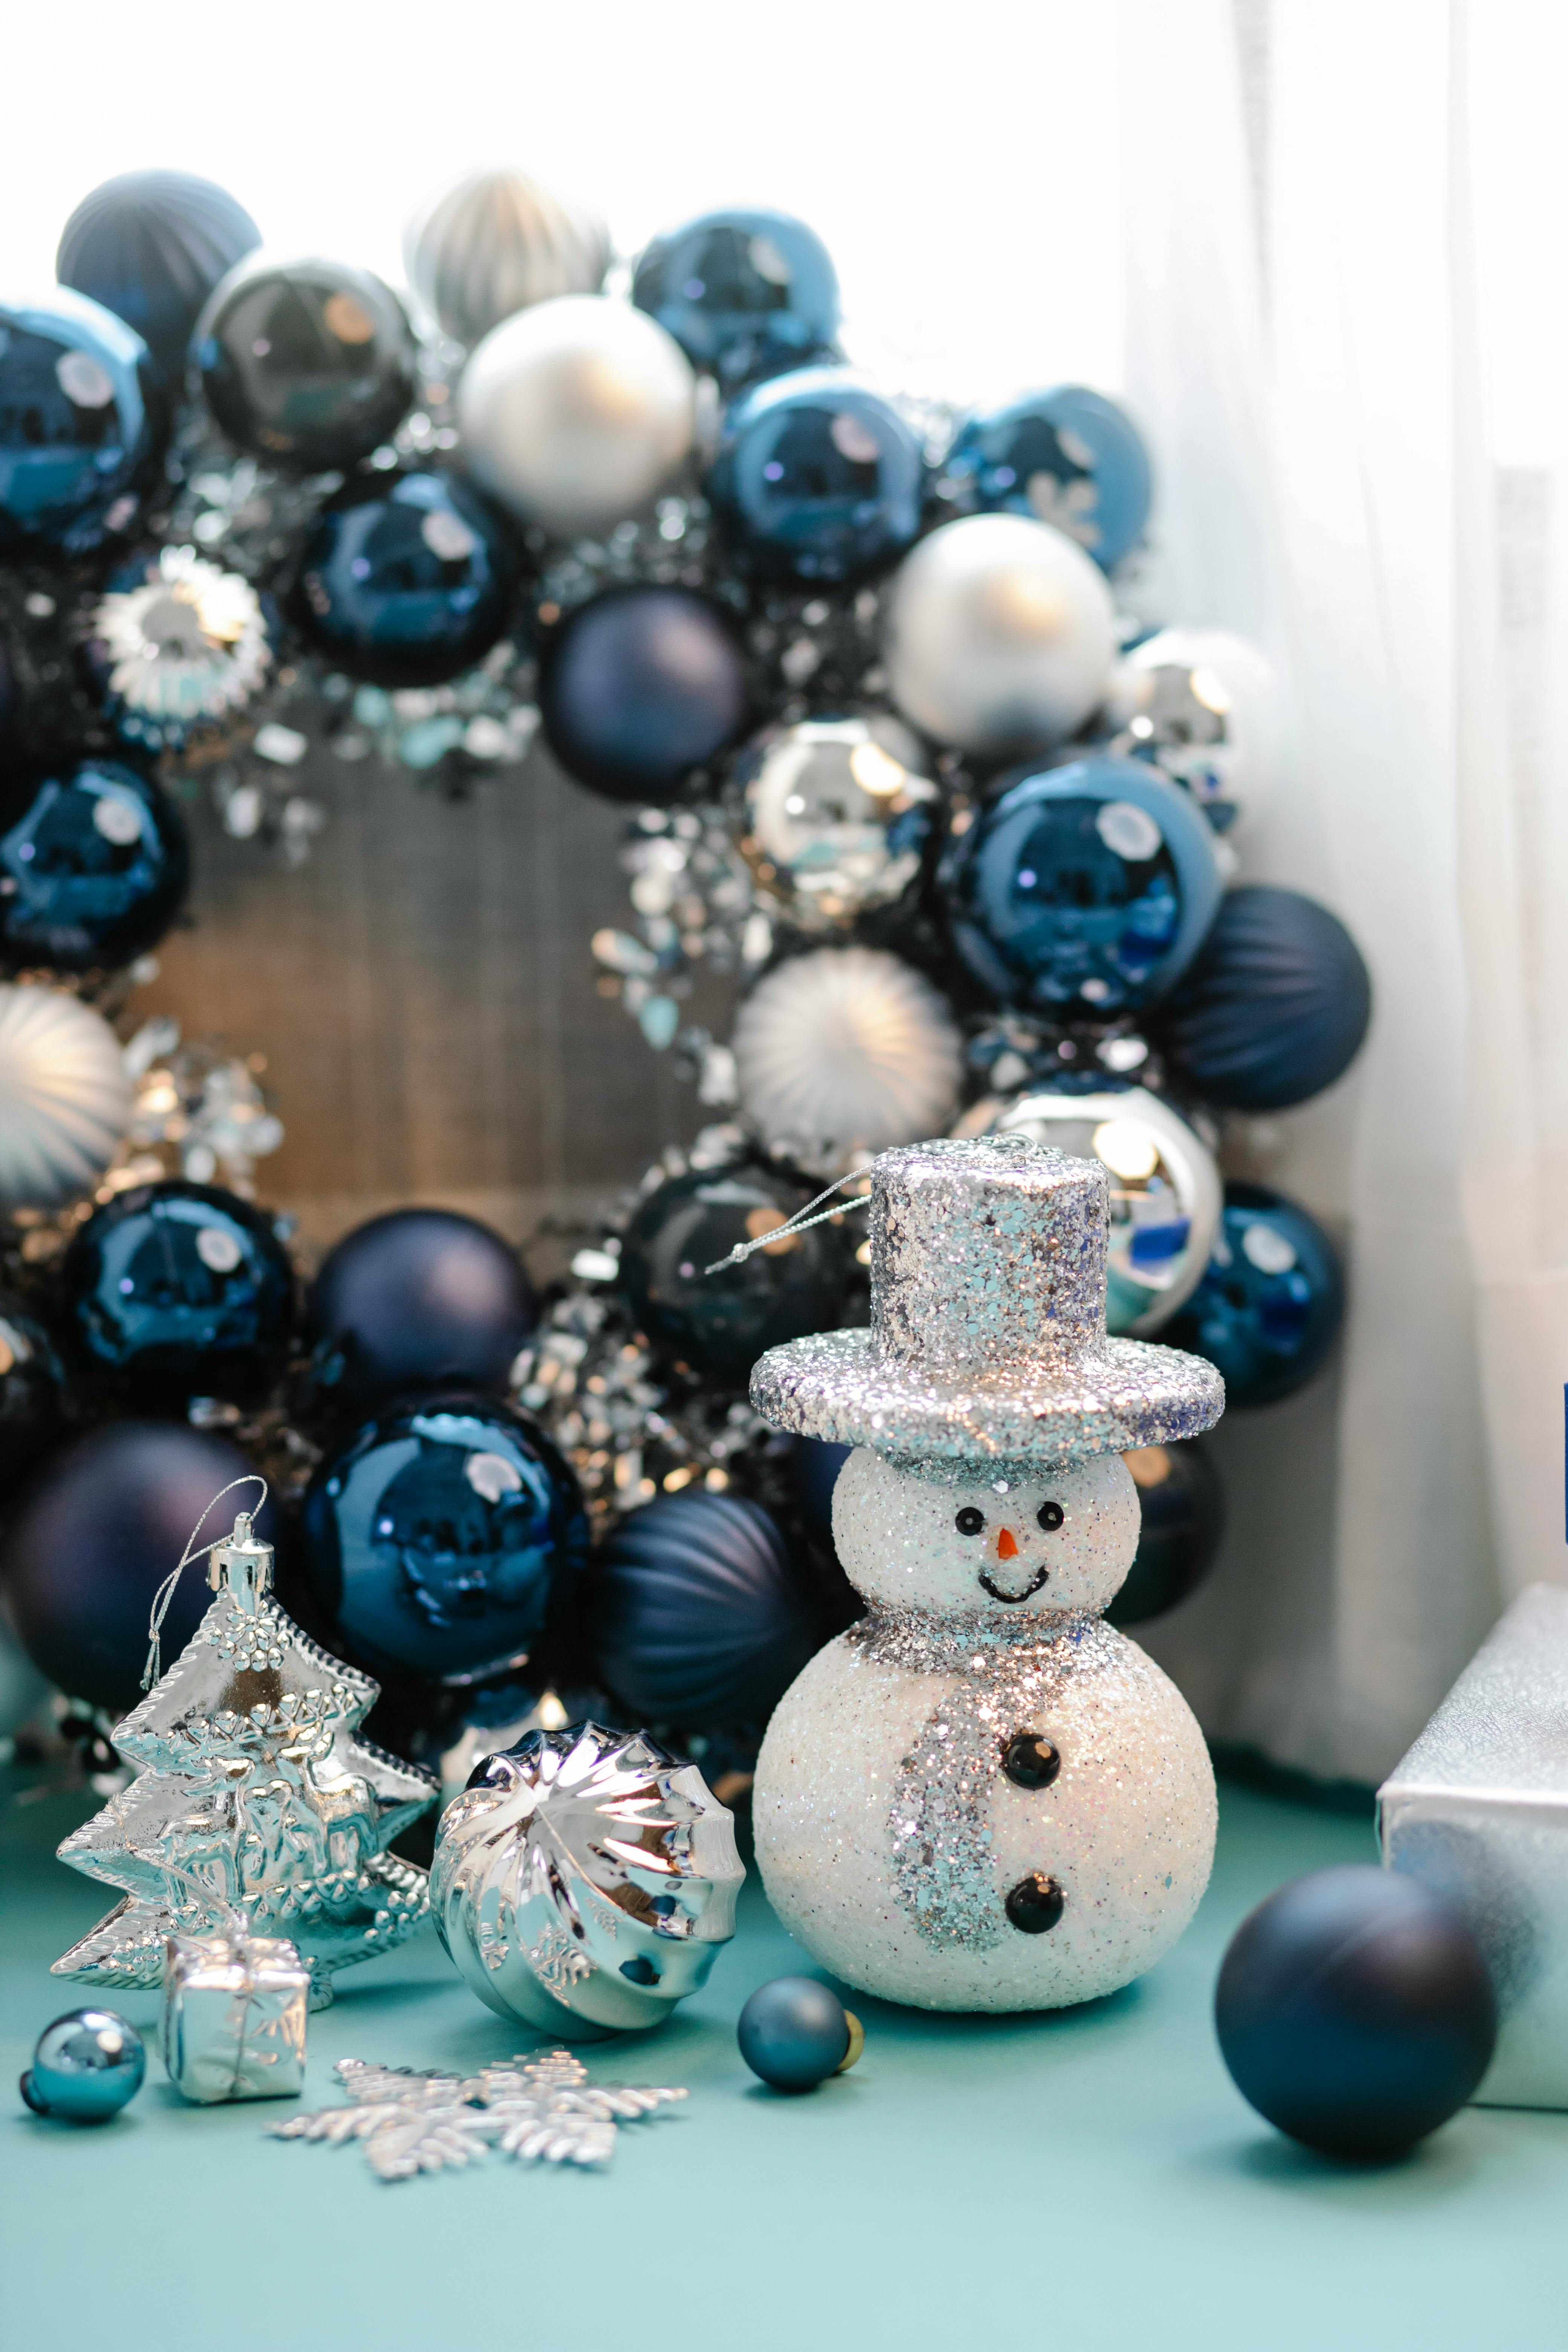 Bright Christmas decorations on blue surface · Free Stock Photo